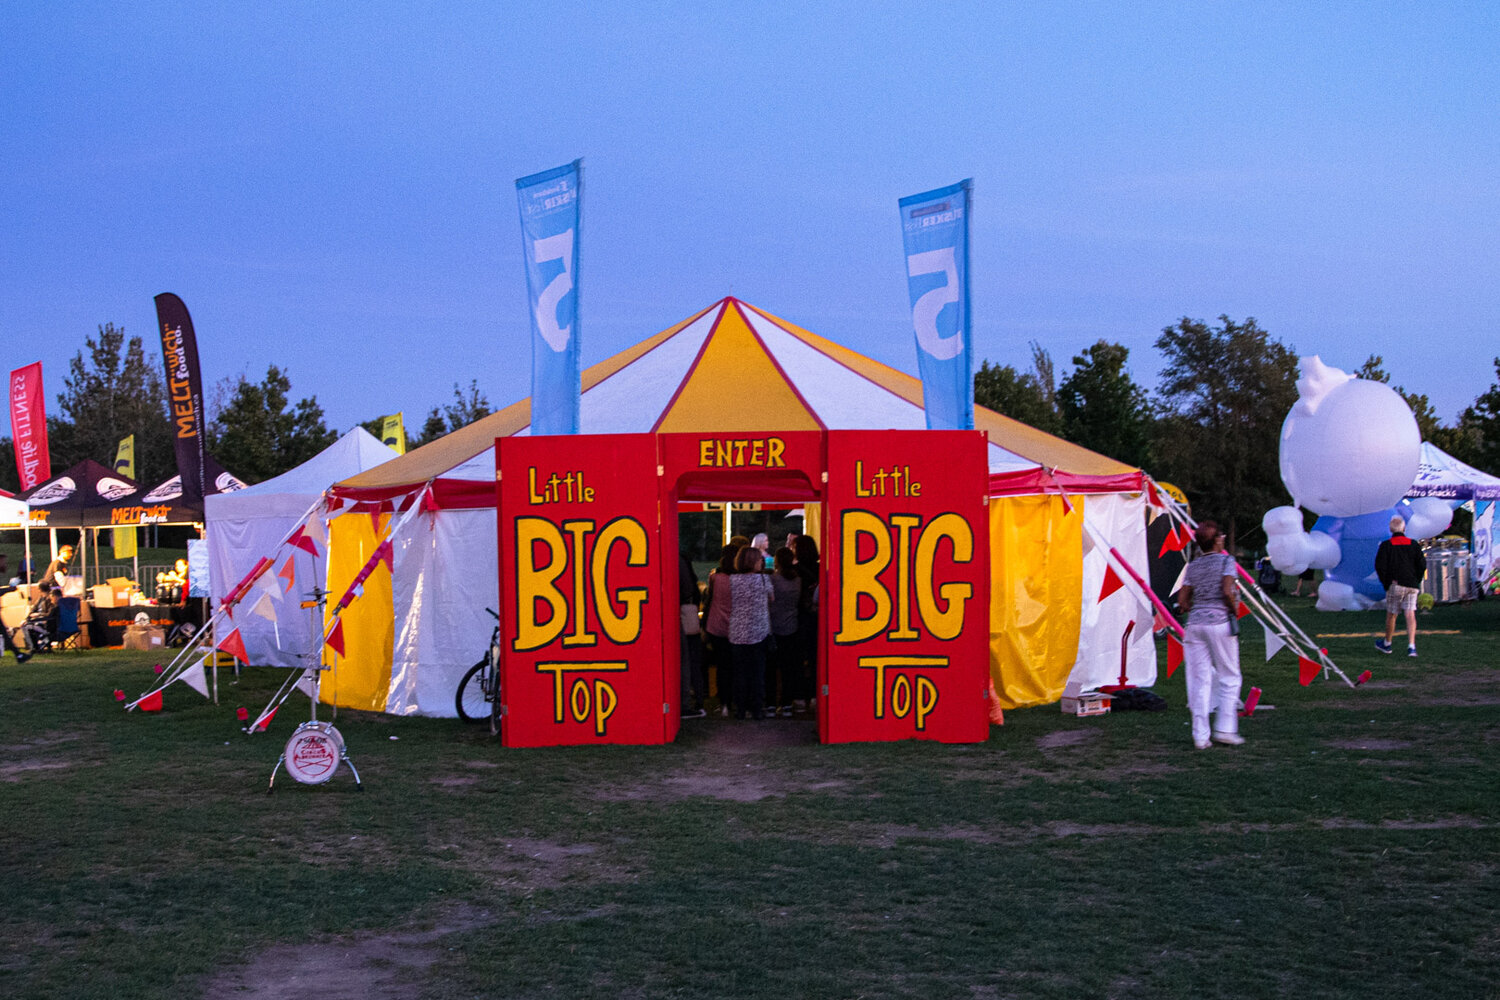 The Little Big Top 